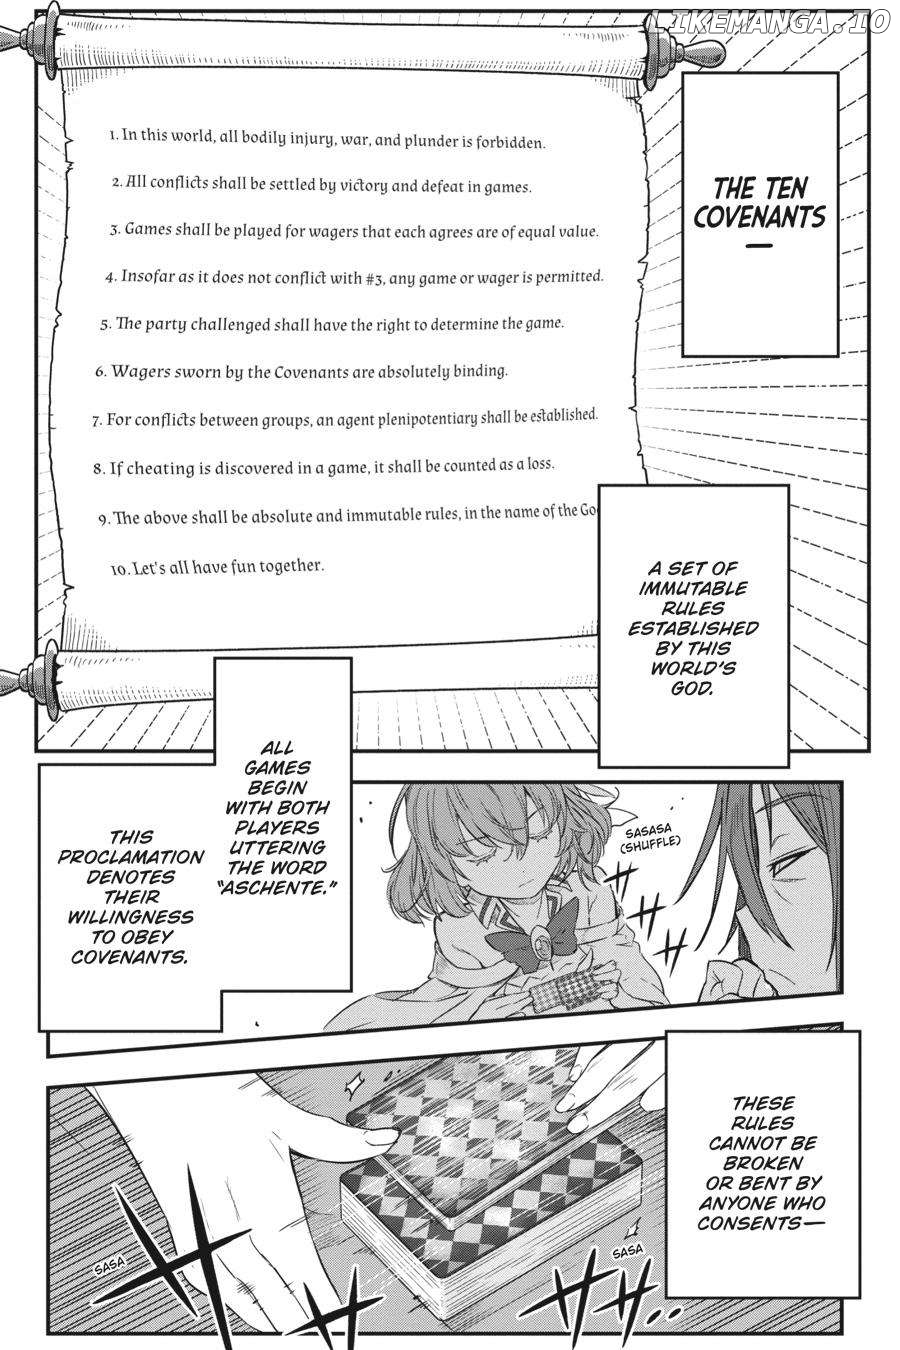 No Game No Life Chapter 2 - Eastern Union Arc Chapter 1 - page 28